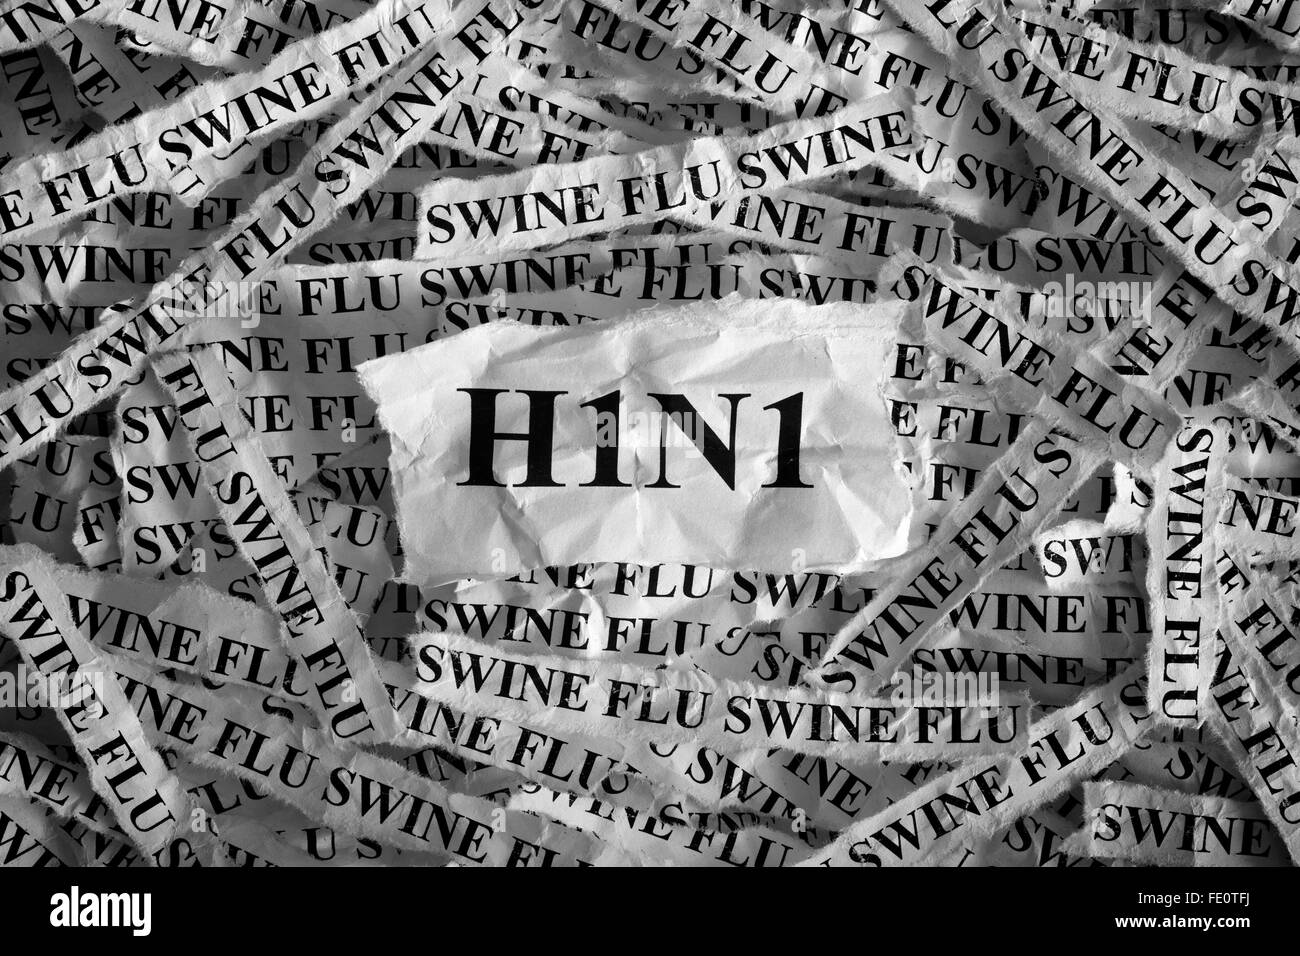 H1N1- Swine Flu. Torn pieces of paper with the words H1N1- Swine Flu. Concept Image. Black and White. Closeup. Stock Photo